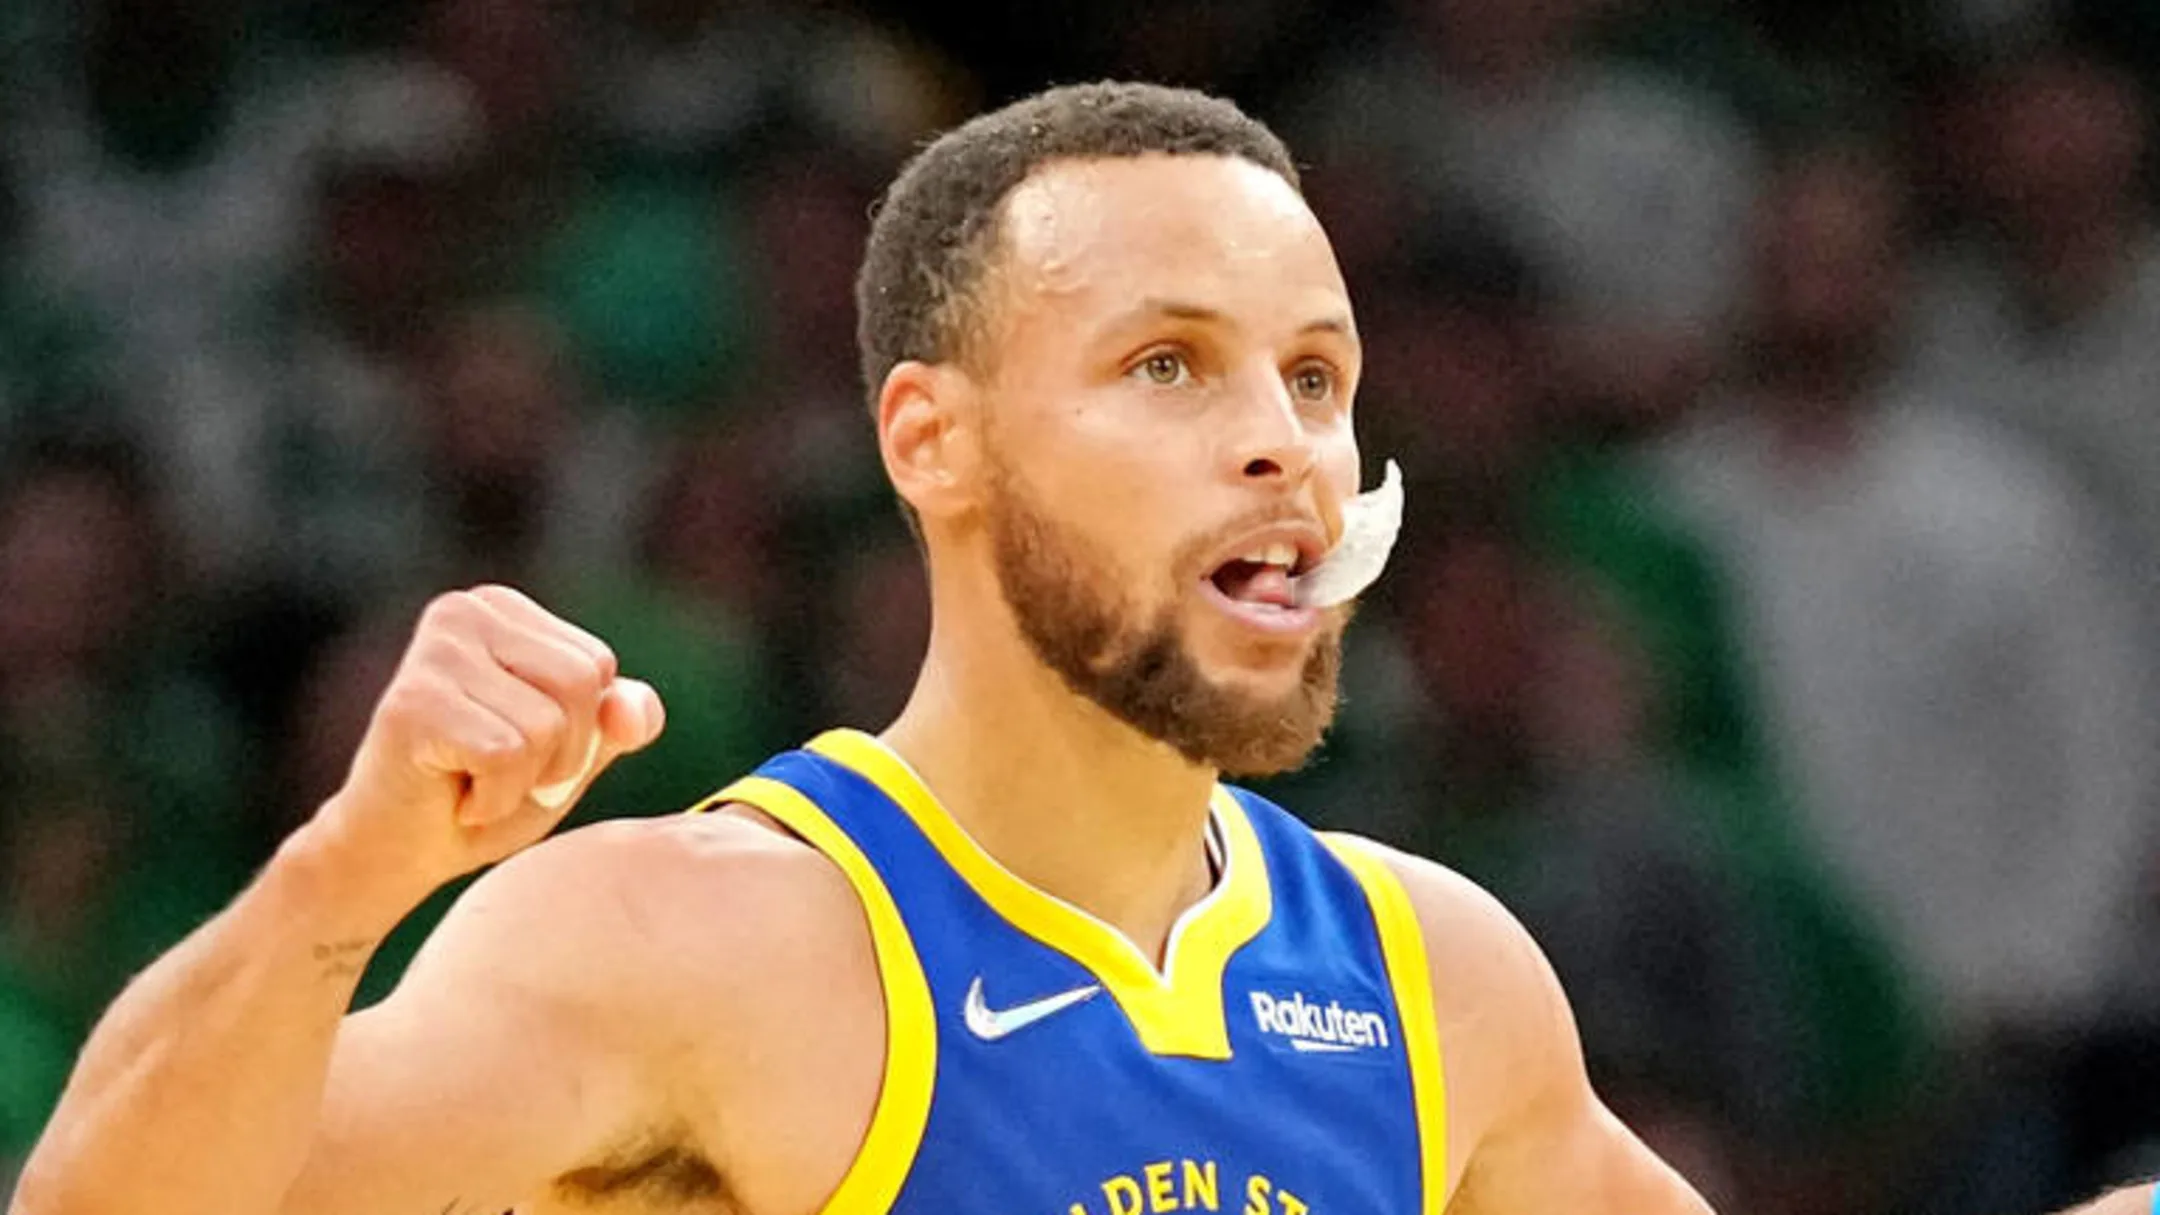 Steph Curry's Stunning Season: Eyeing MVP as Warriors Navigate Ups and Downs